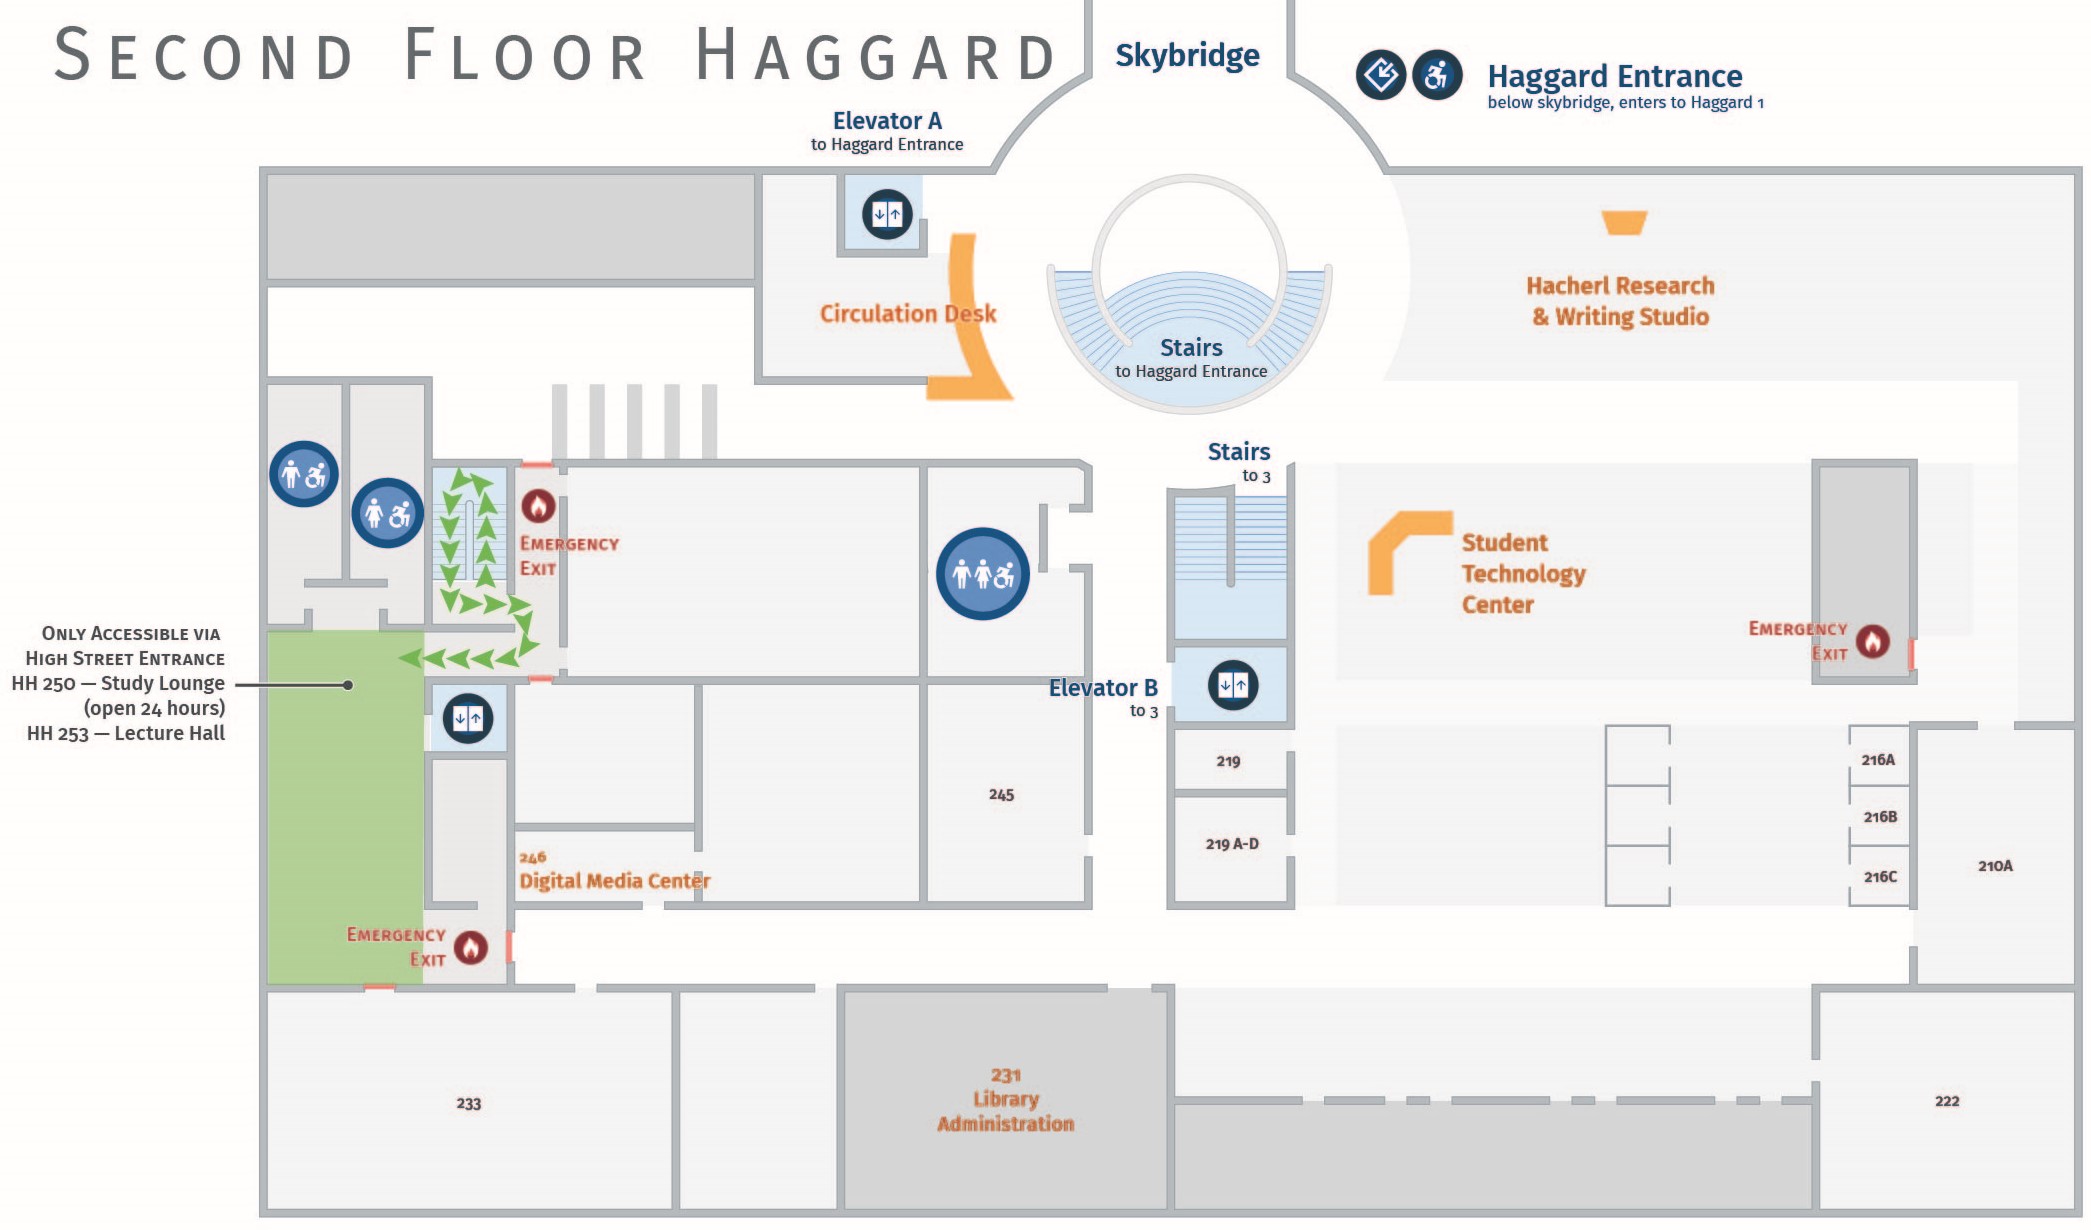 Floor plan, second floor of Haggard with path to HH 250.